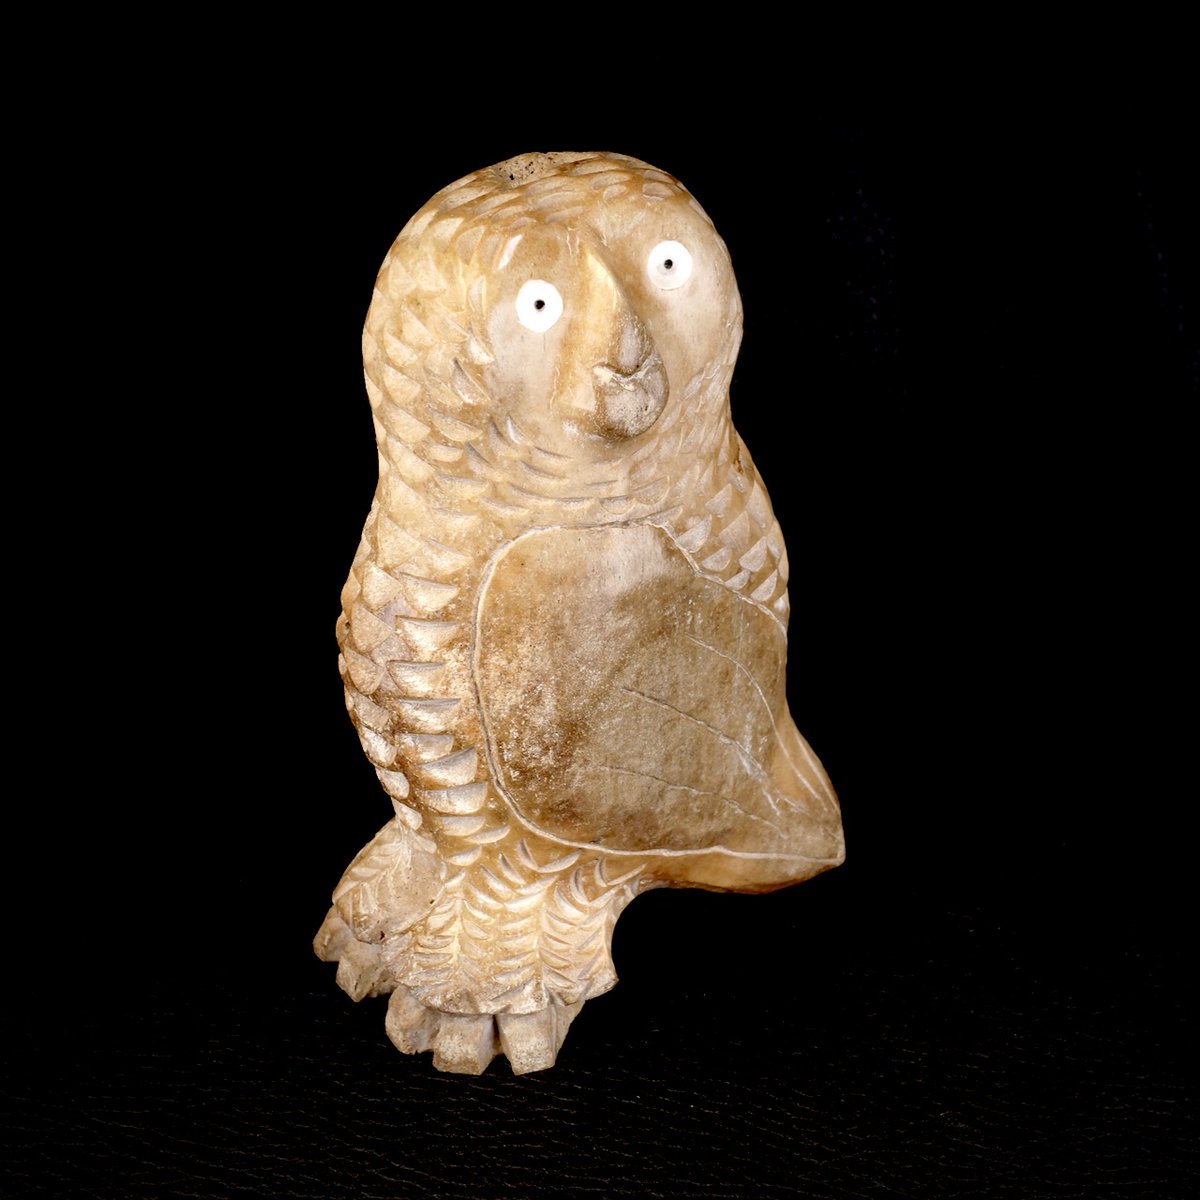 Old Native American Owl Inuit Carving Fossilized Whale Bone Sculpture - signed 
farriderwest.etsy.com/listing/161008… 

Available at Far-Rider-West.com 
#nativeamerican #shaman #uniquegift #inuit #spiritualart #nativeamericanart #inuitart #whale #carvimg #owl